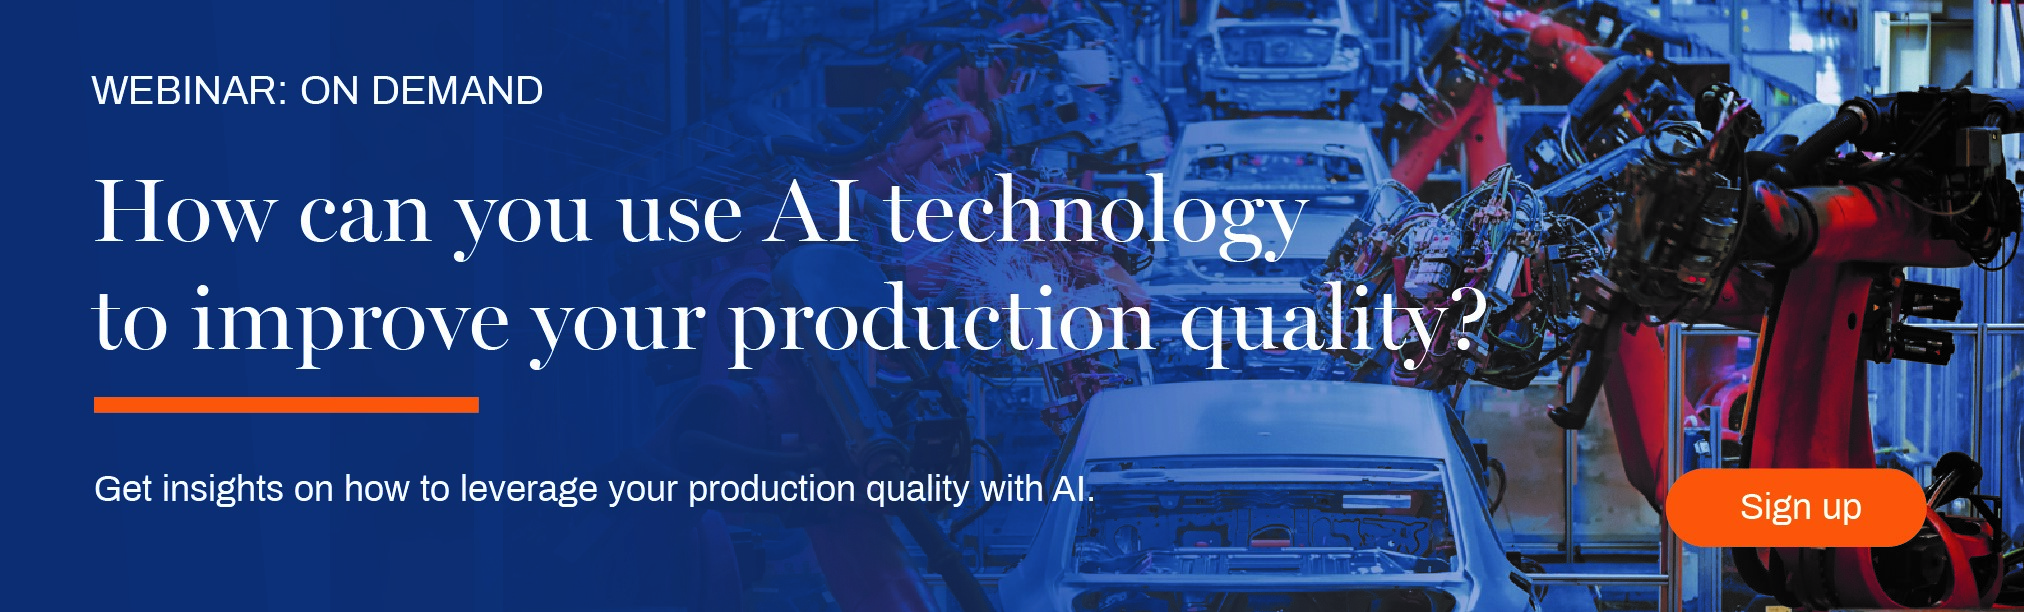 Banner for on demand webinar about AI and production quality